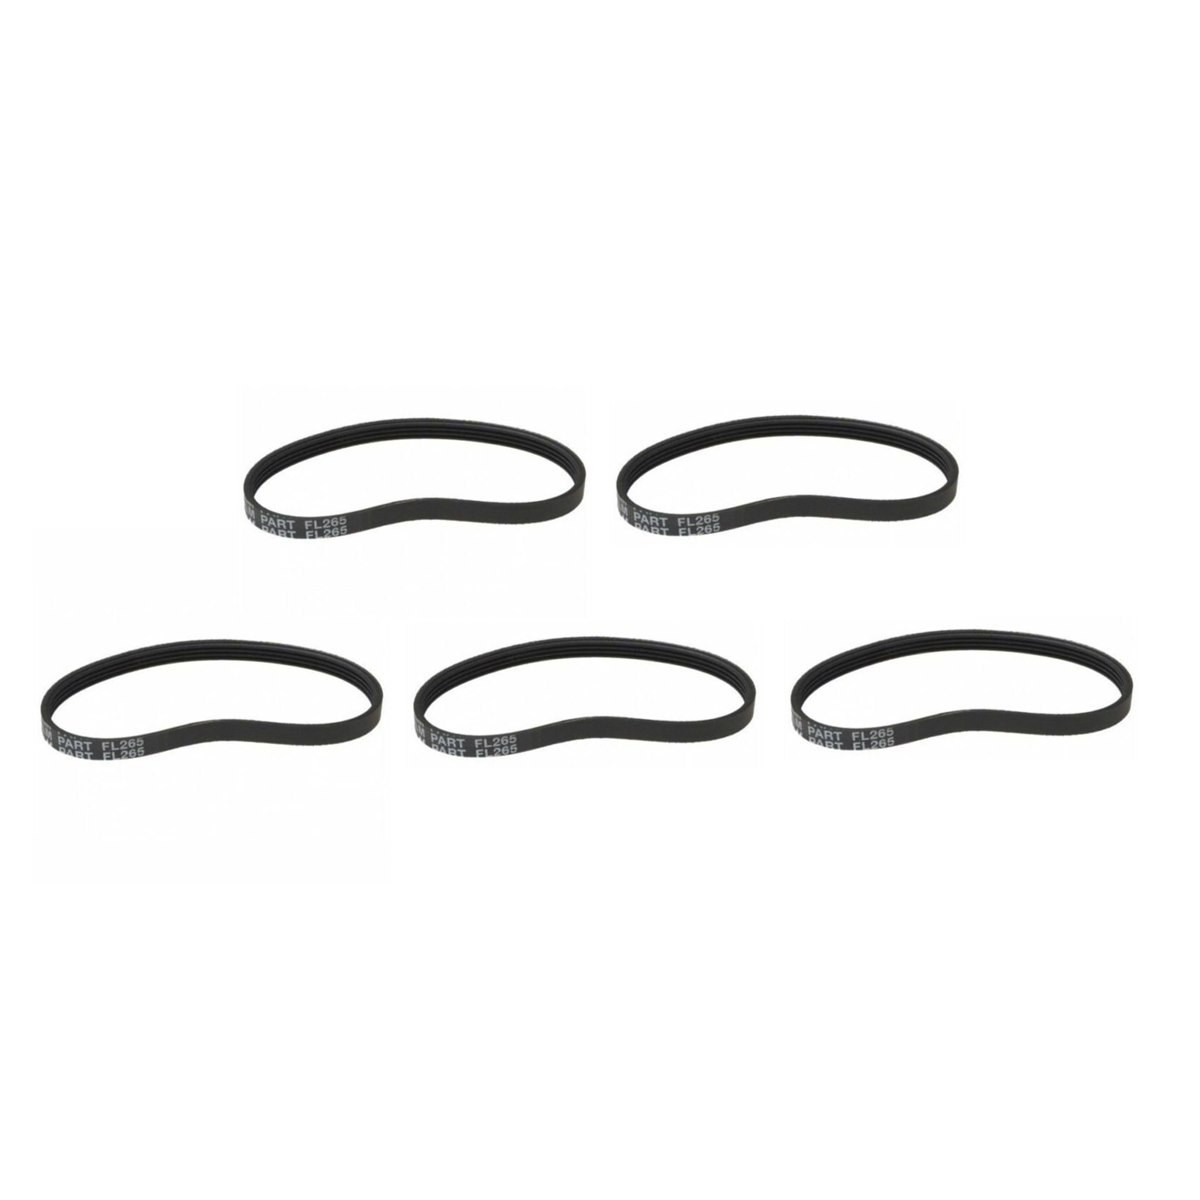 Case of 5 x ALM FL265 Drive Belt to Fit Flymo Lawnmowers